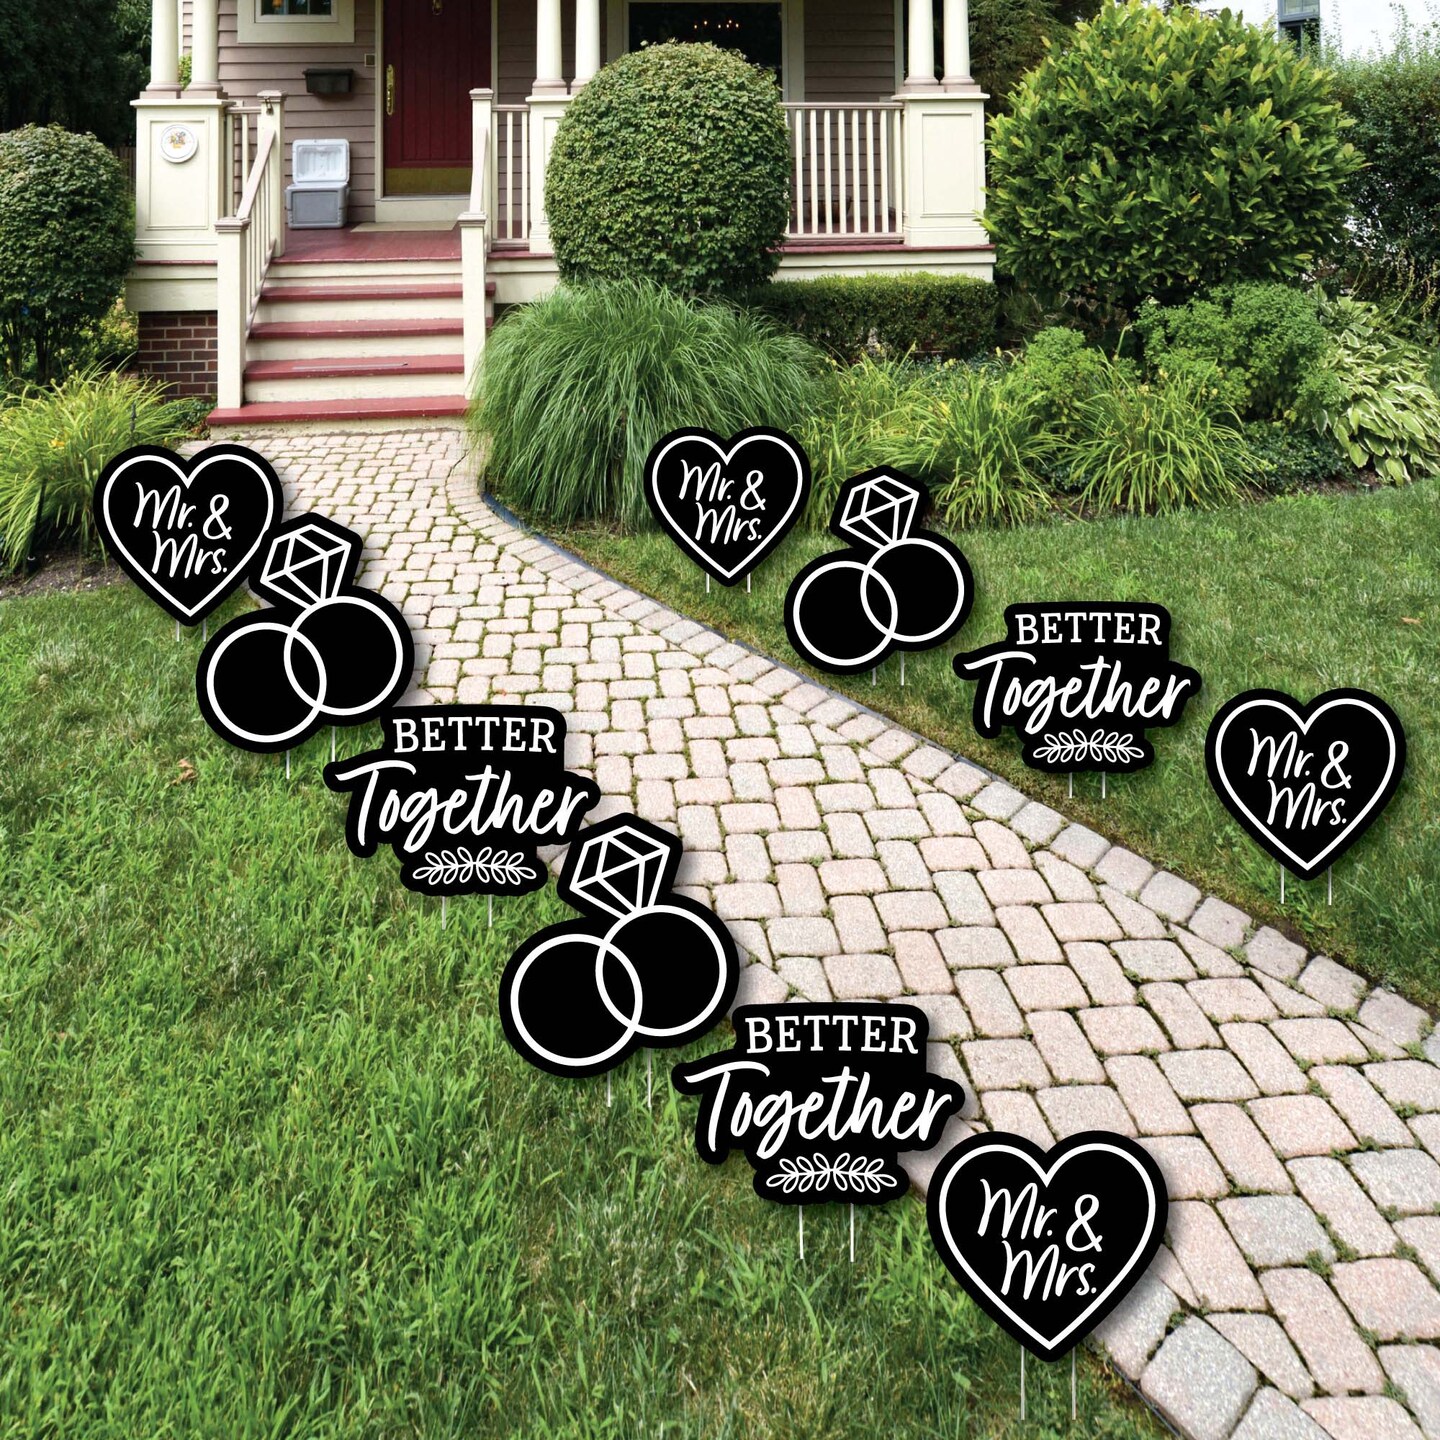 Big Dot of Happiness Mr. and Mrs. - Heart and Rings Lawn Decorations - Outdoor Black and White Wedding or Bridal Shower Yard Decorations - 10 Piece